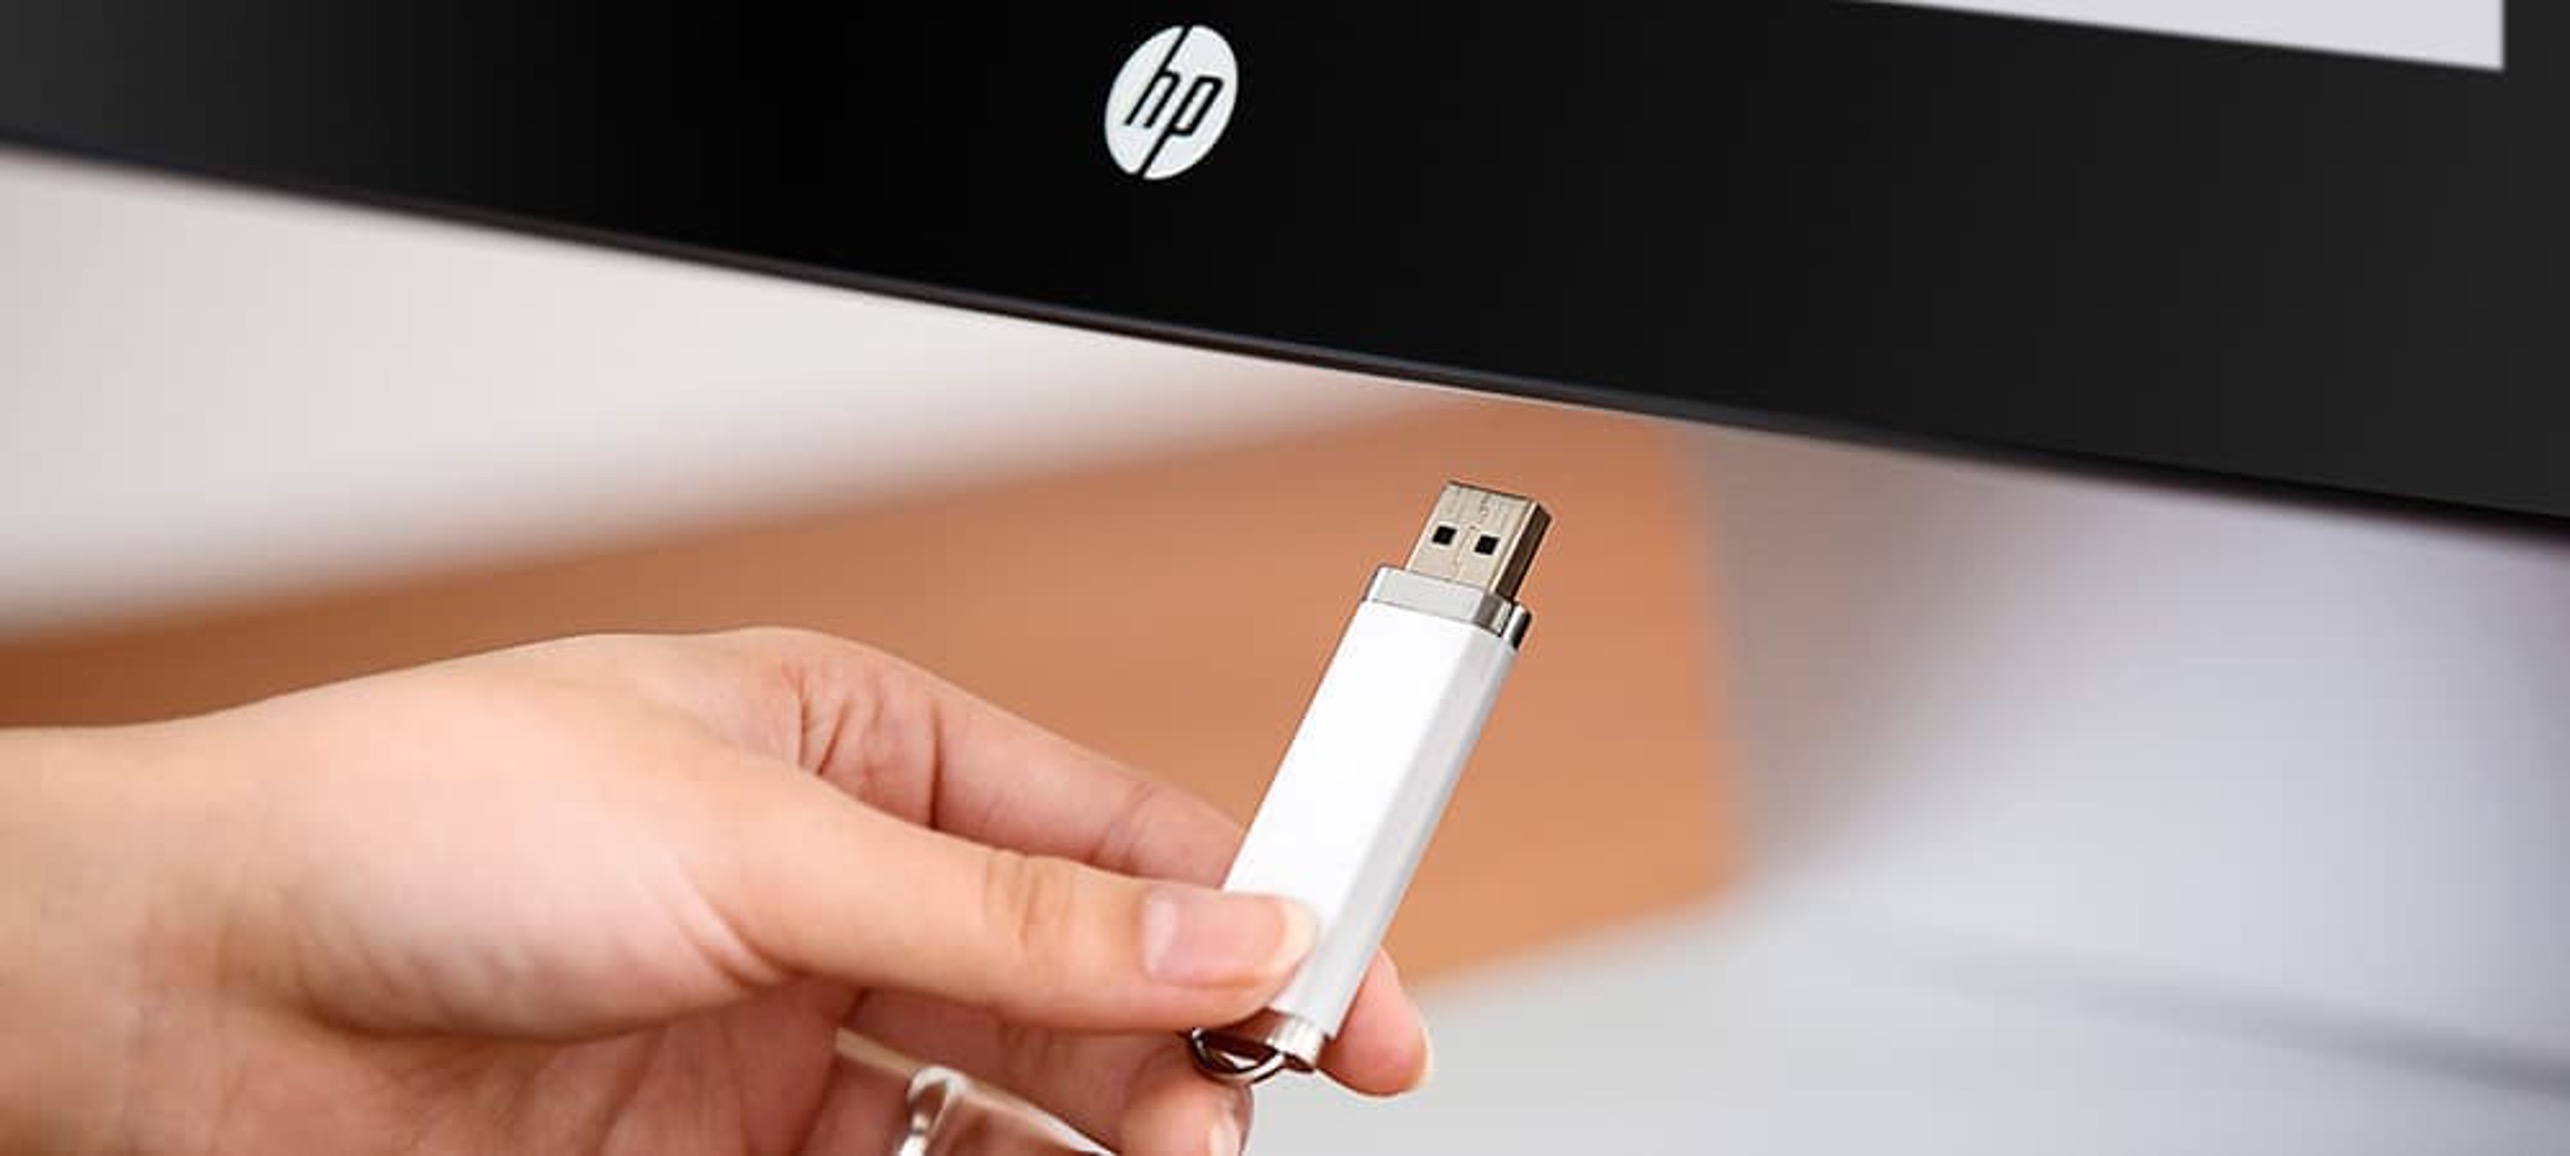 How To Turn A USB Into A Mini PC